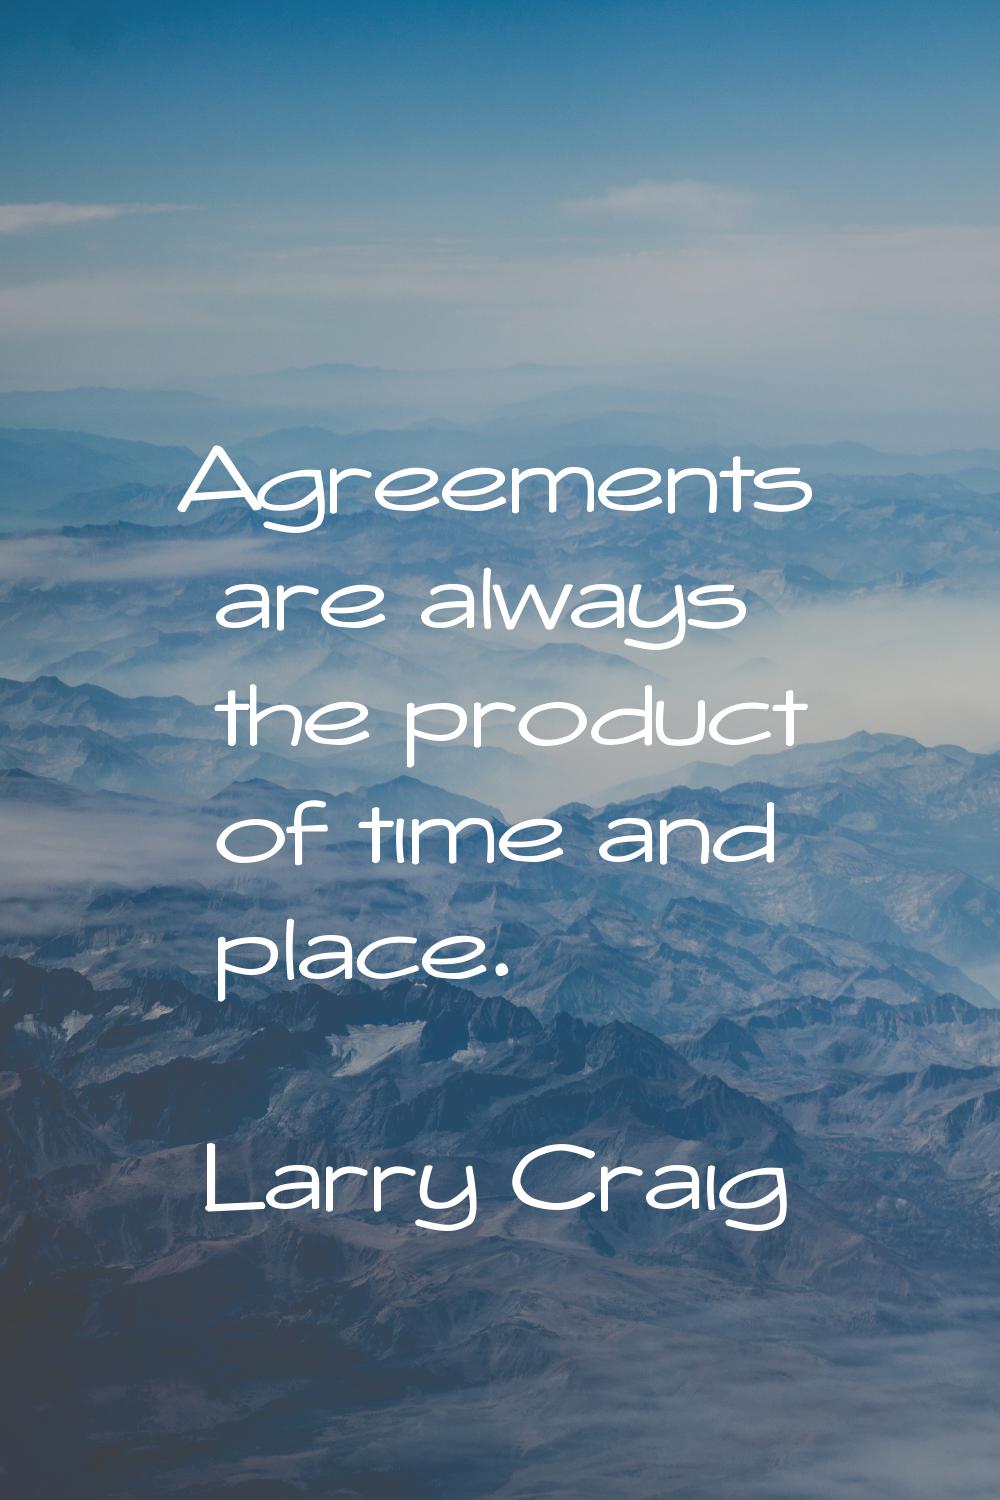 Agreements are always the product of time and place.